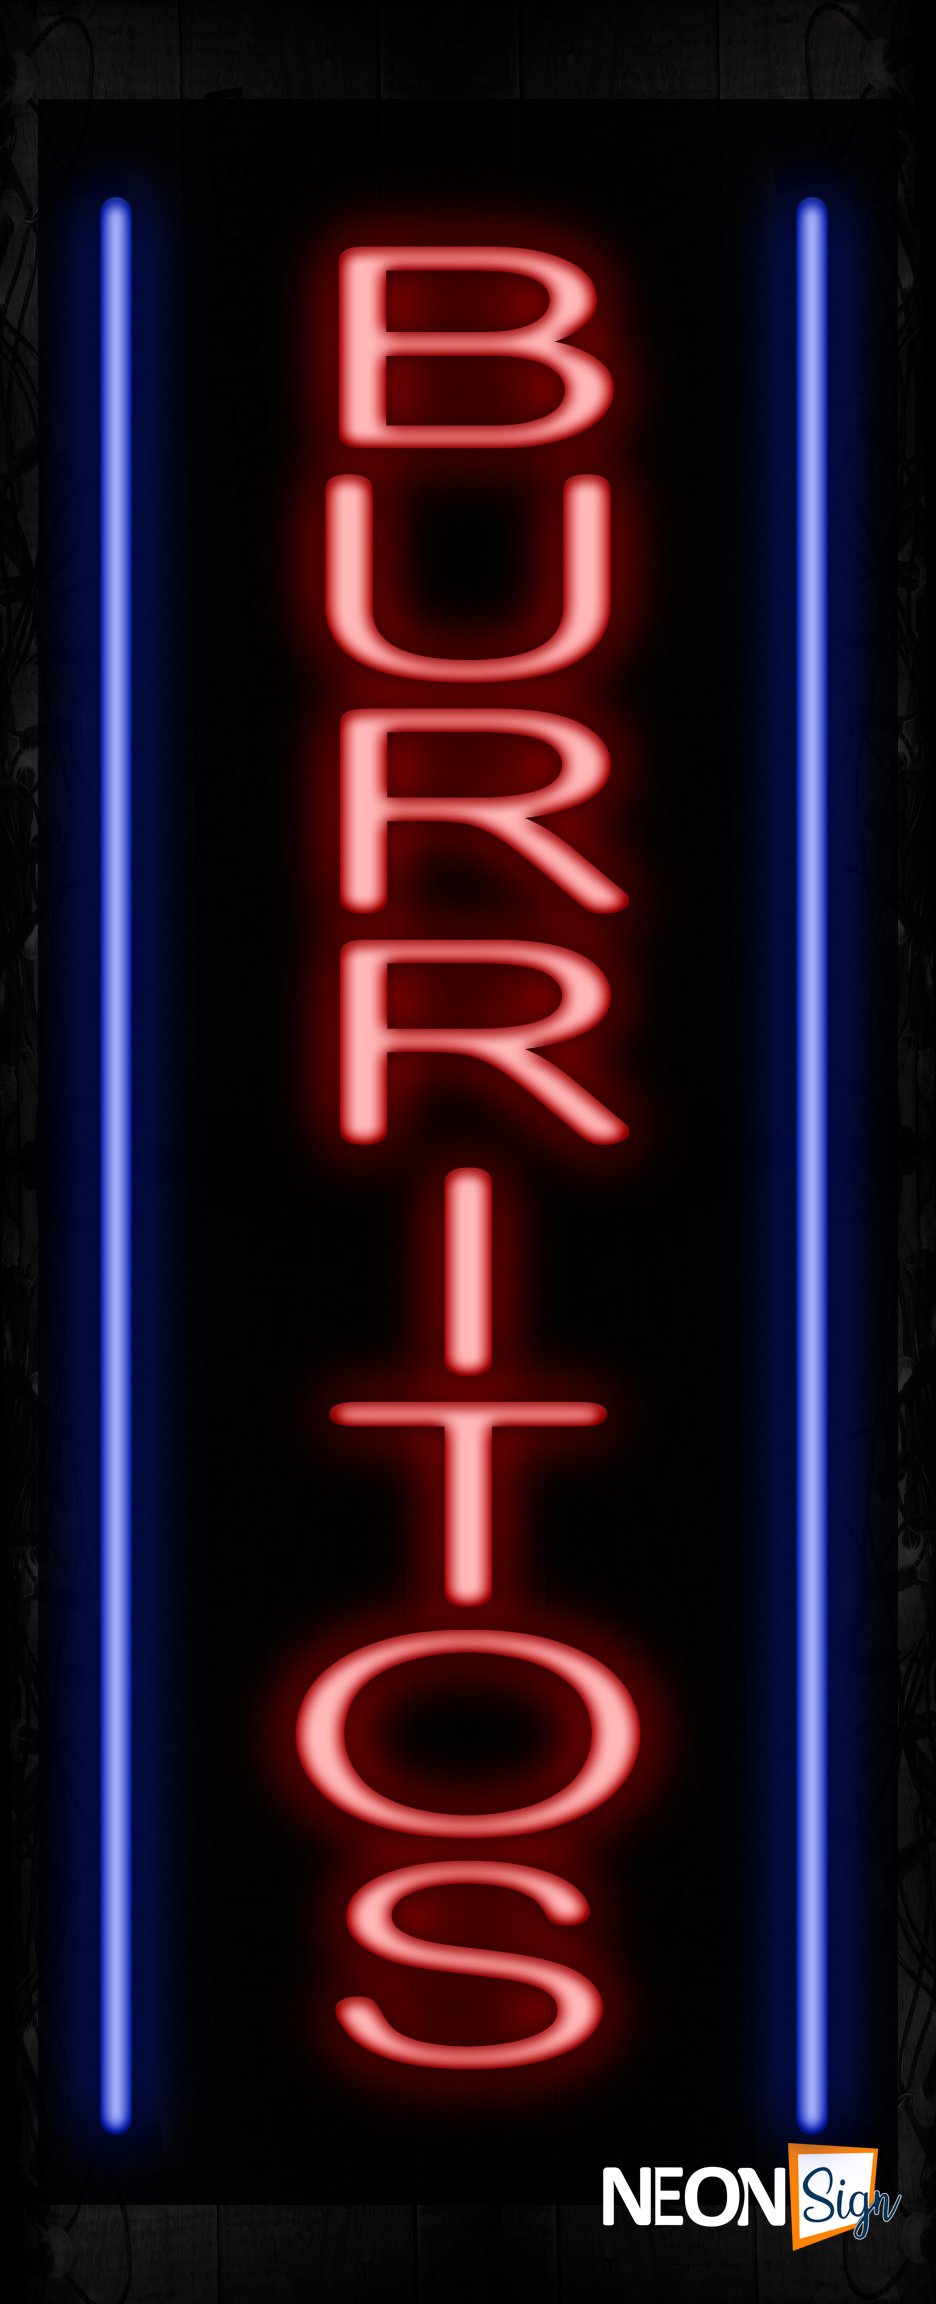 Image of 11527 Burritos with blue vertical boder Neon Signs_32 x12 Black Backing